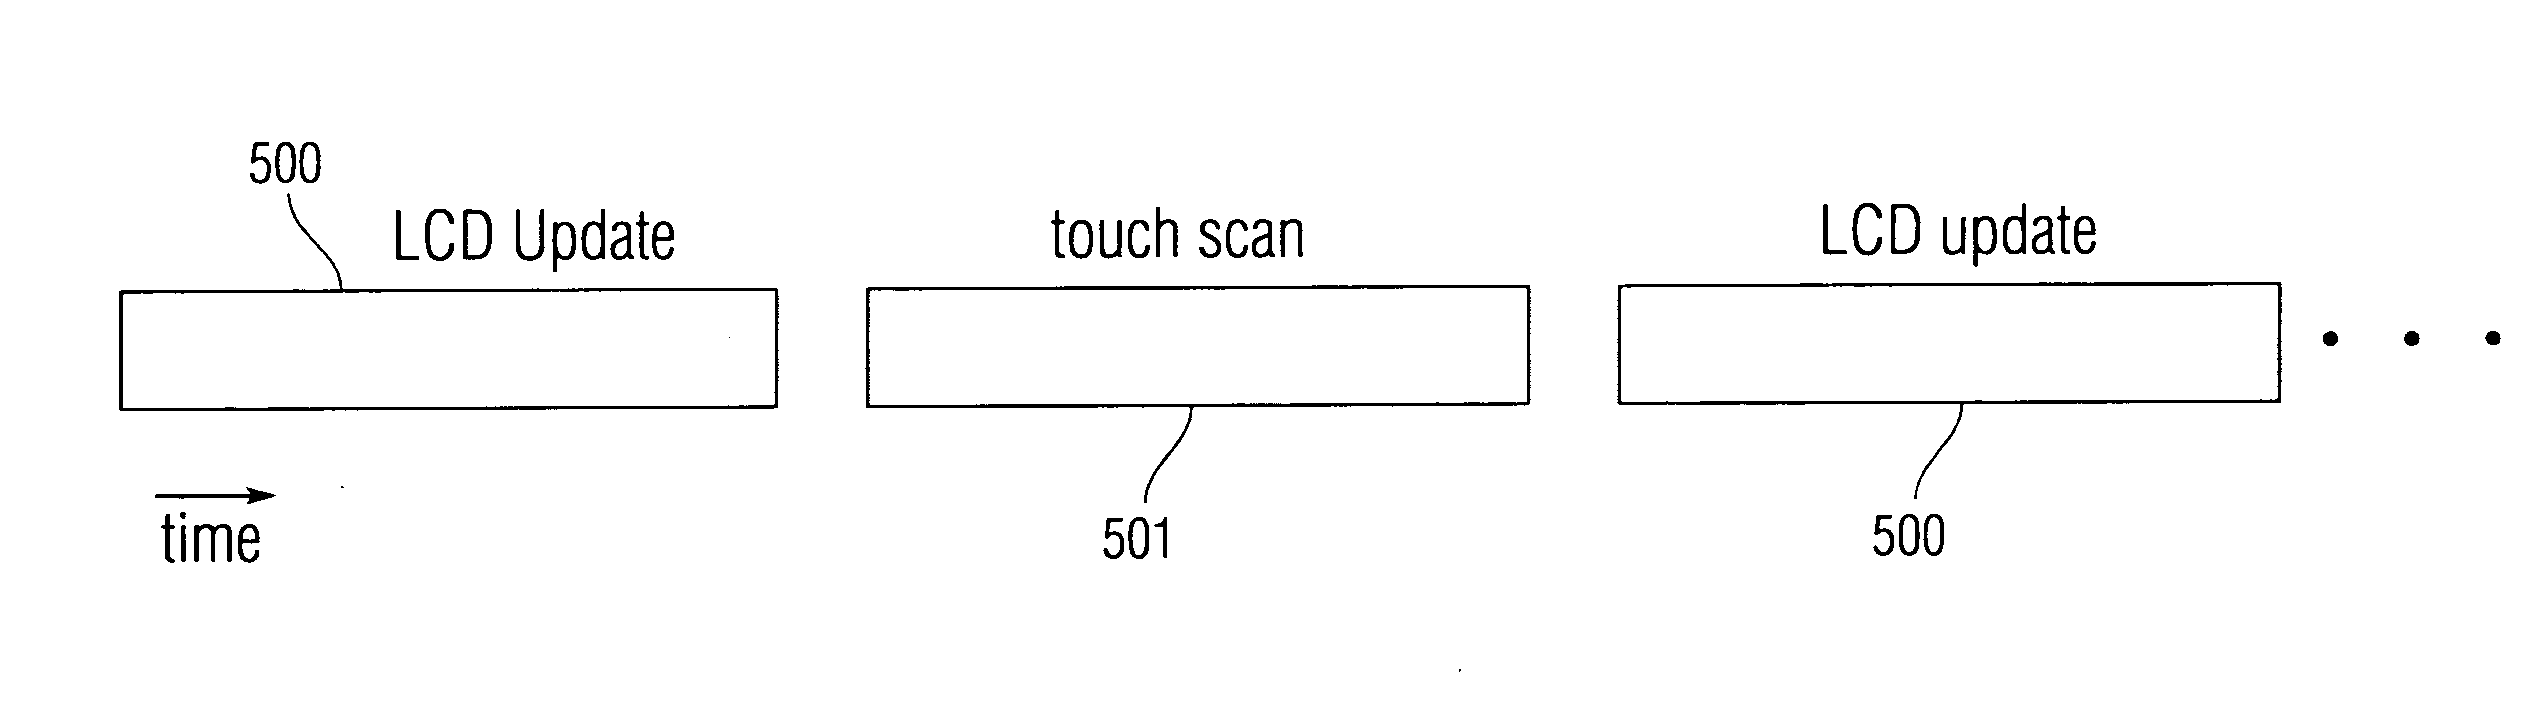 Integrated in-plane switching